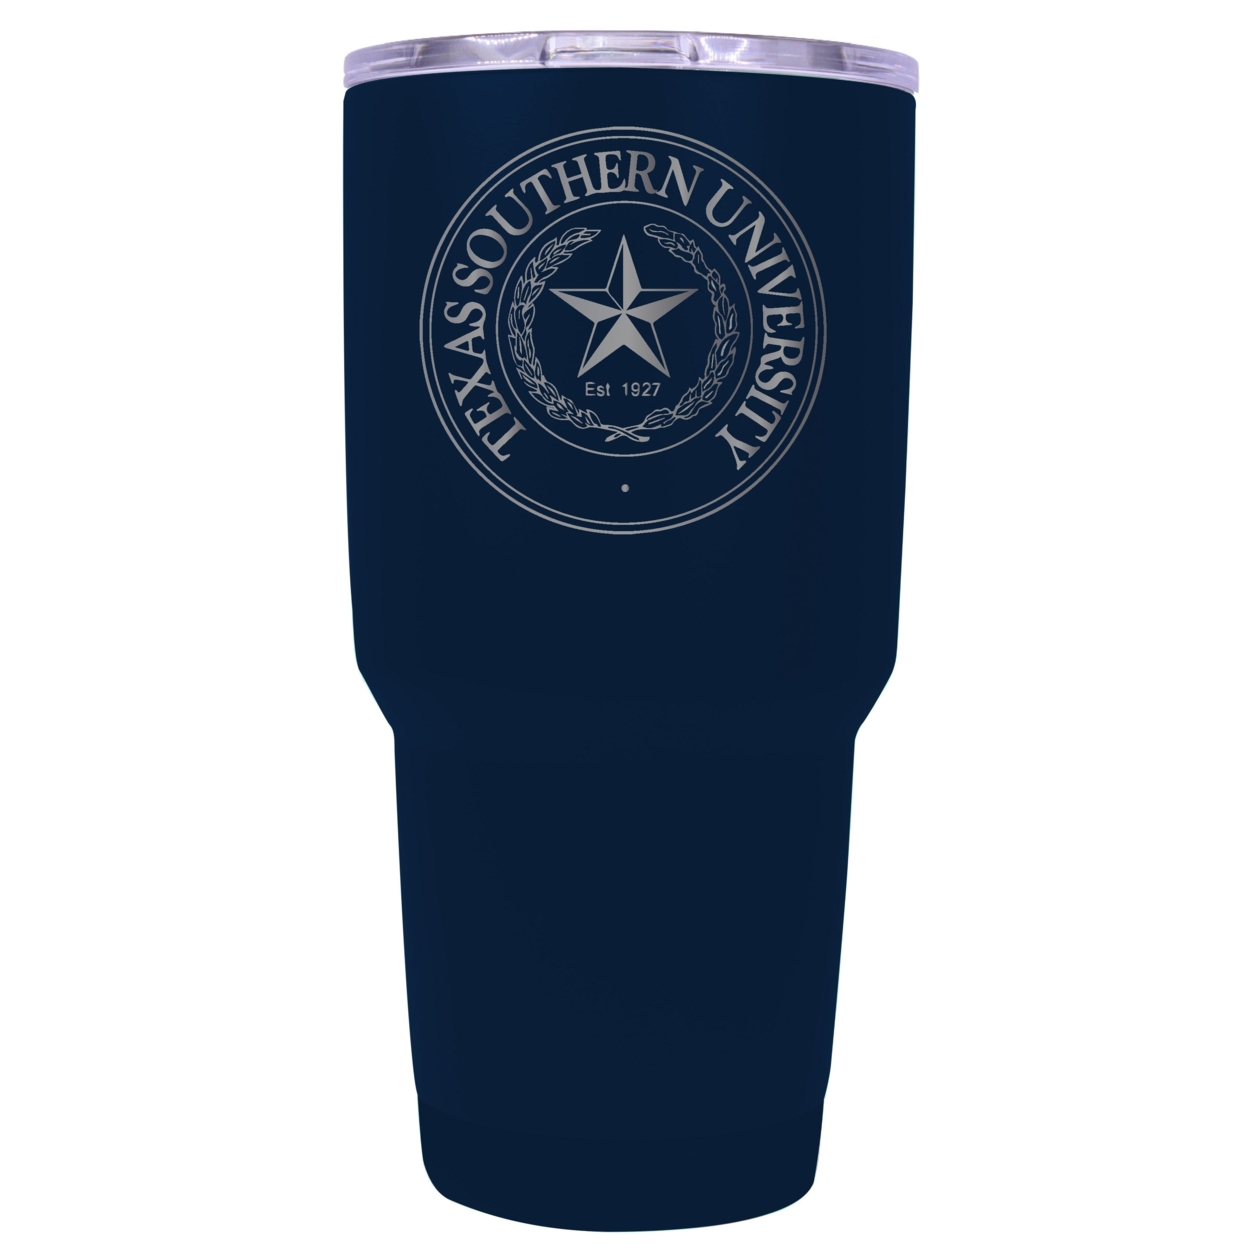 Texas Southern University 24 Oz Laser Engraved Stainless Steel Insulated Tumbler - Choose Your Color. - Navy